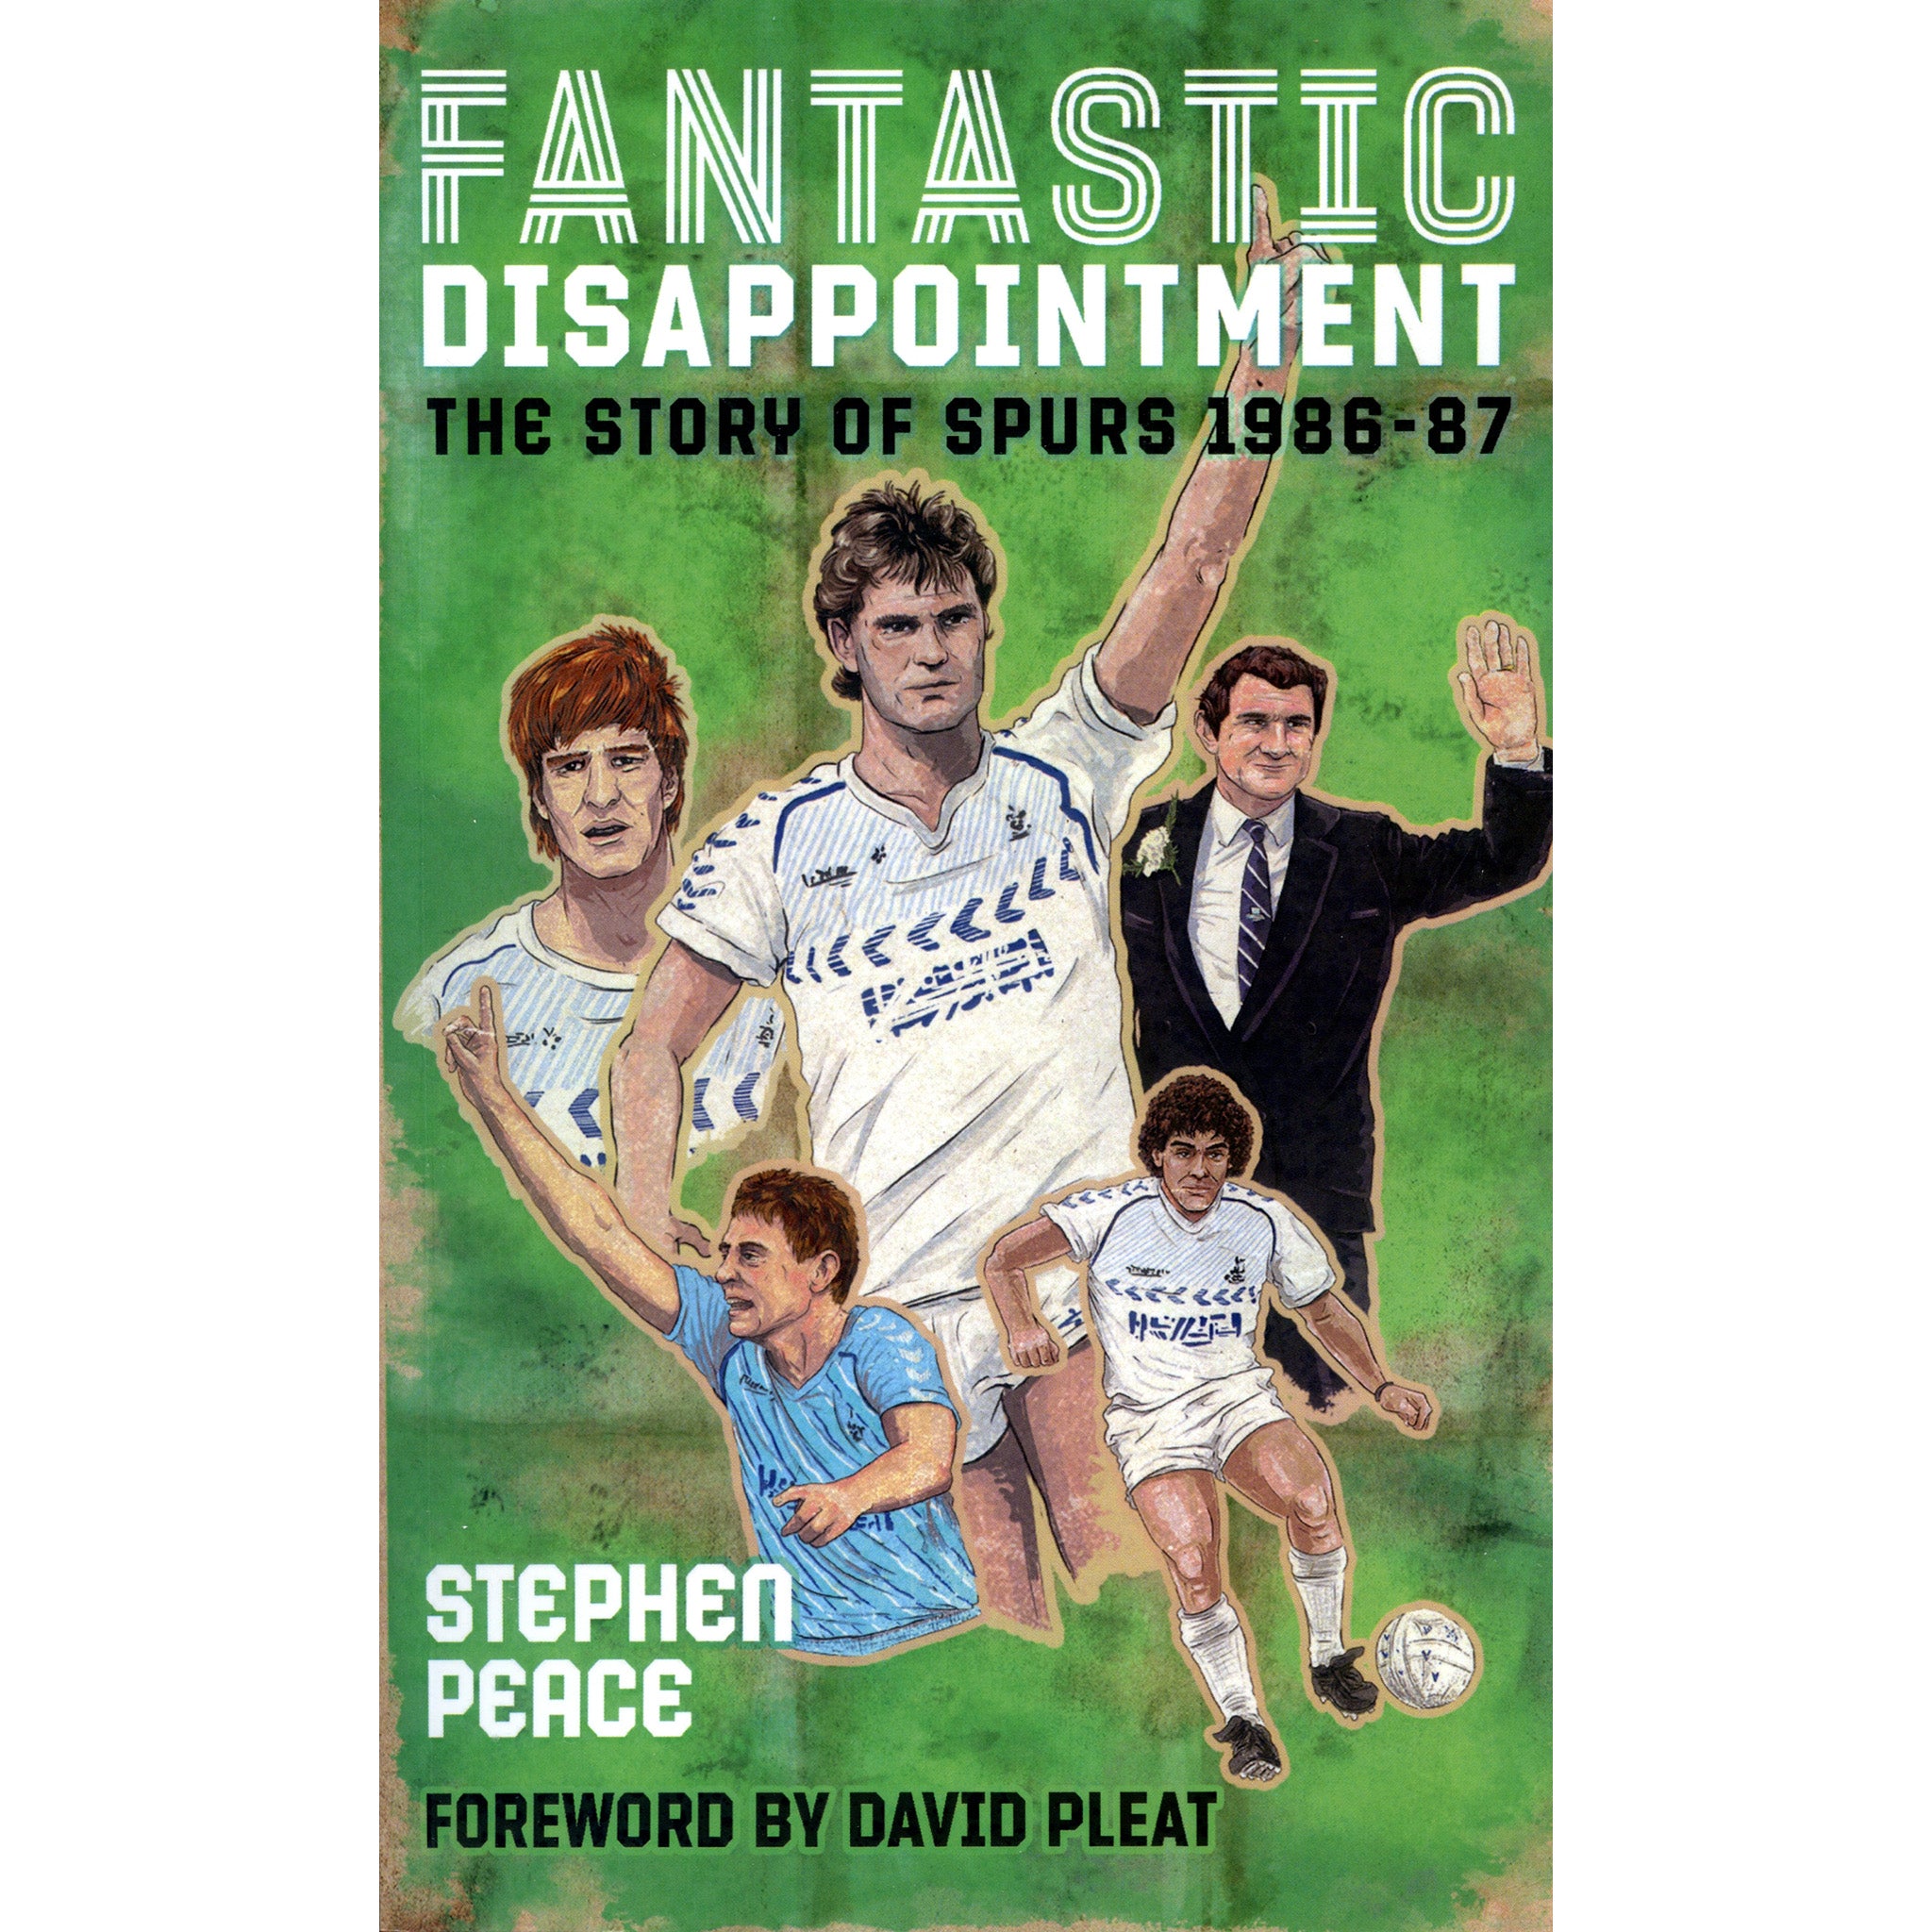 Fantastic Disappointment – The Story of Spurs 1986-87